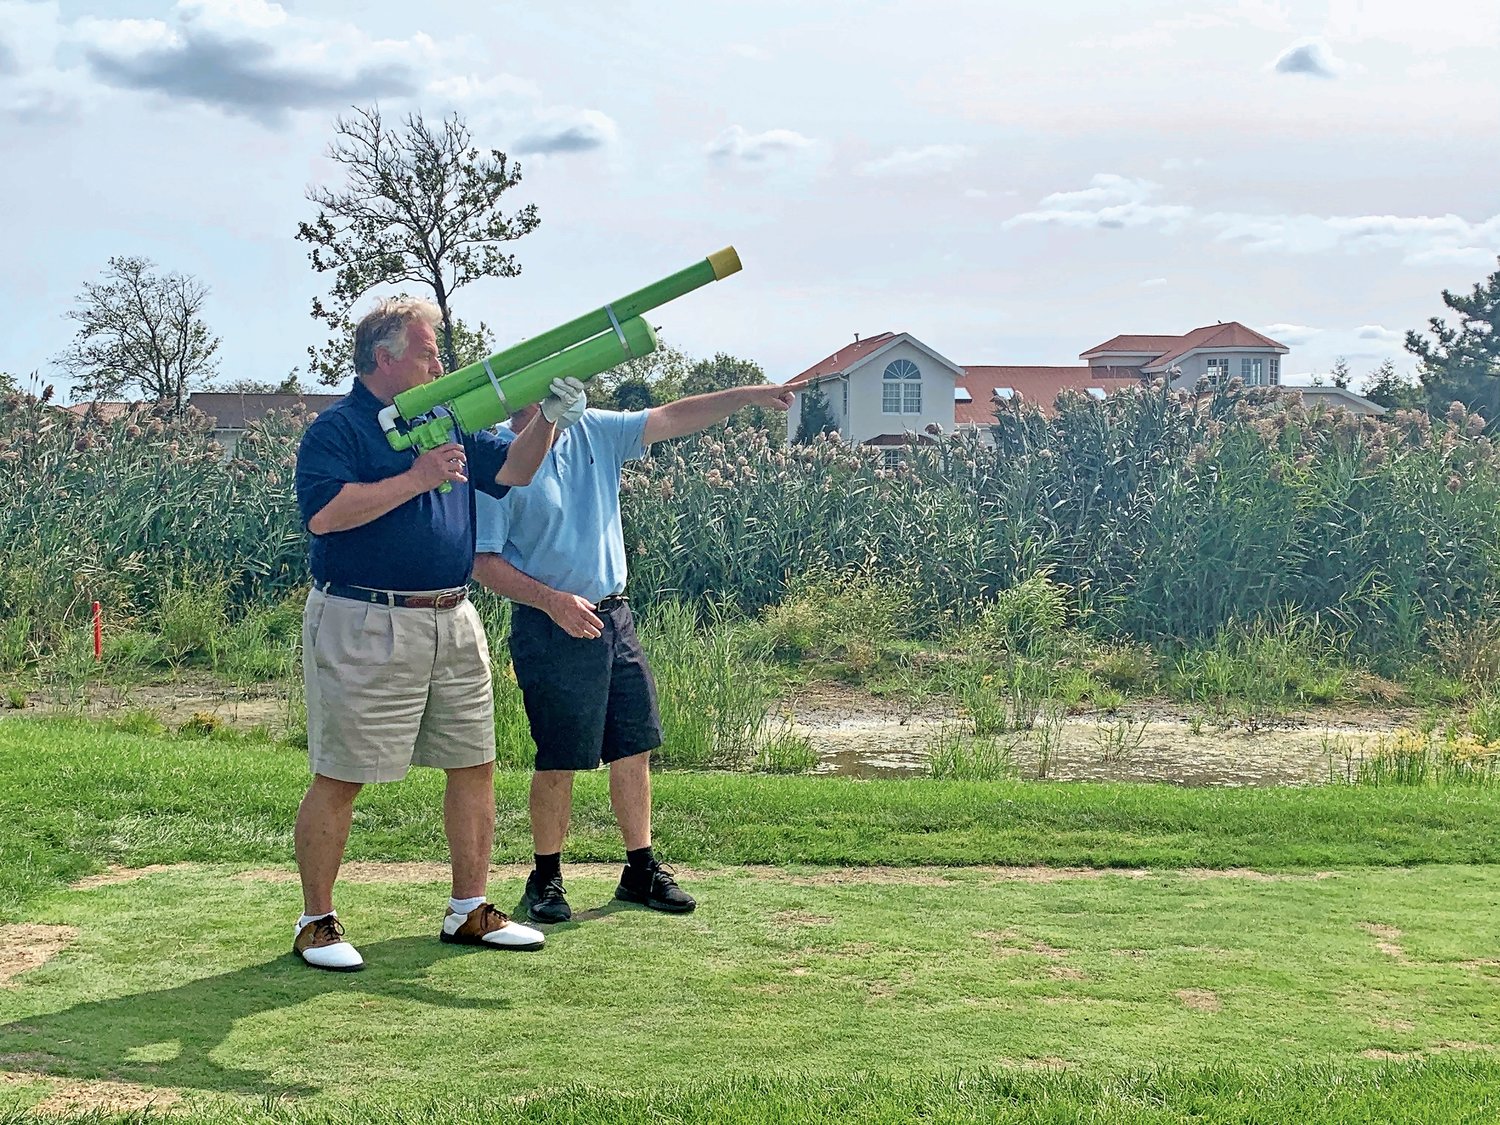 Michael Sapraicone, president and CEO of Squad Security, took aim at the Seawane Club’s 16th green with a golf ball cannon launcher.